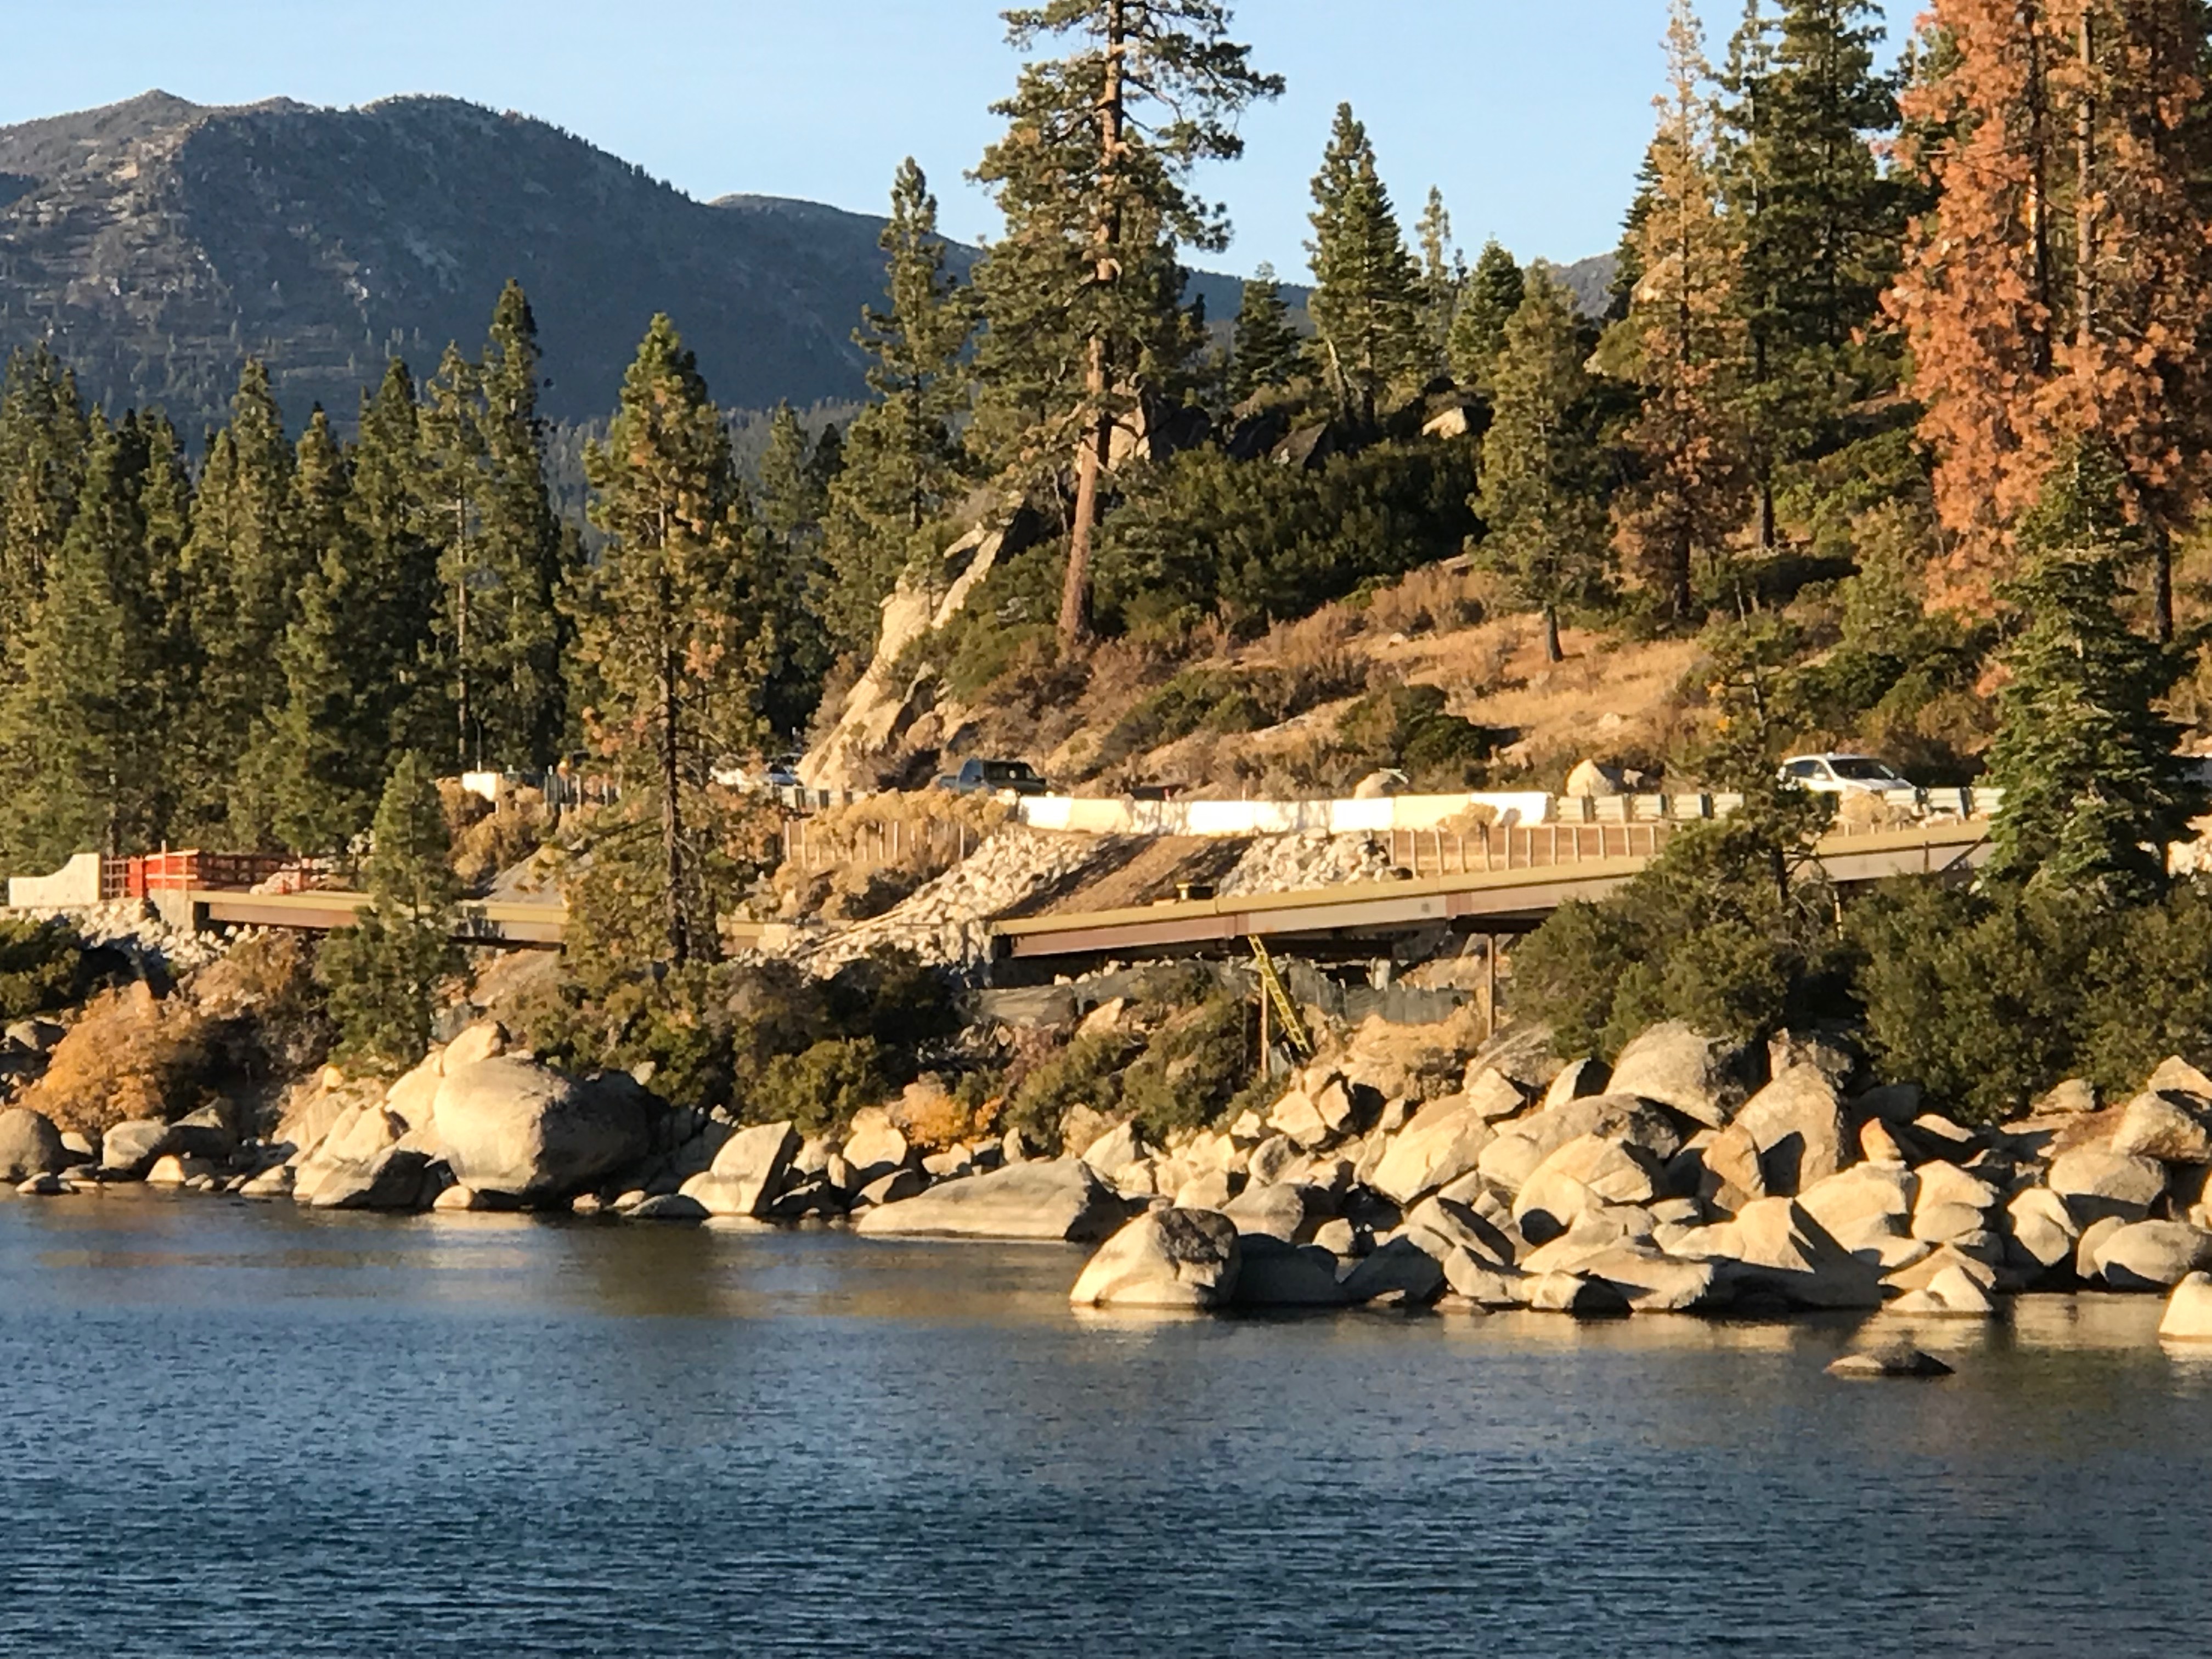 FRP Right Fit for Shared-use Path on Lake Tahoe's Rocky Shoreline